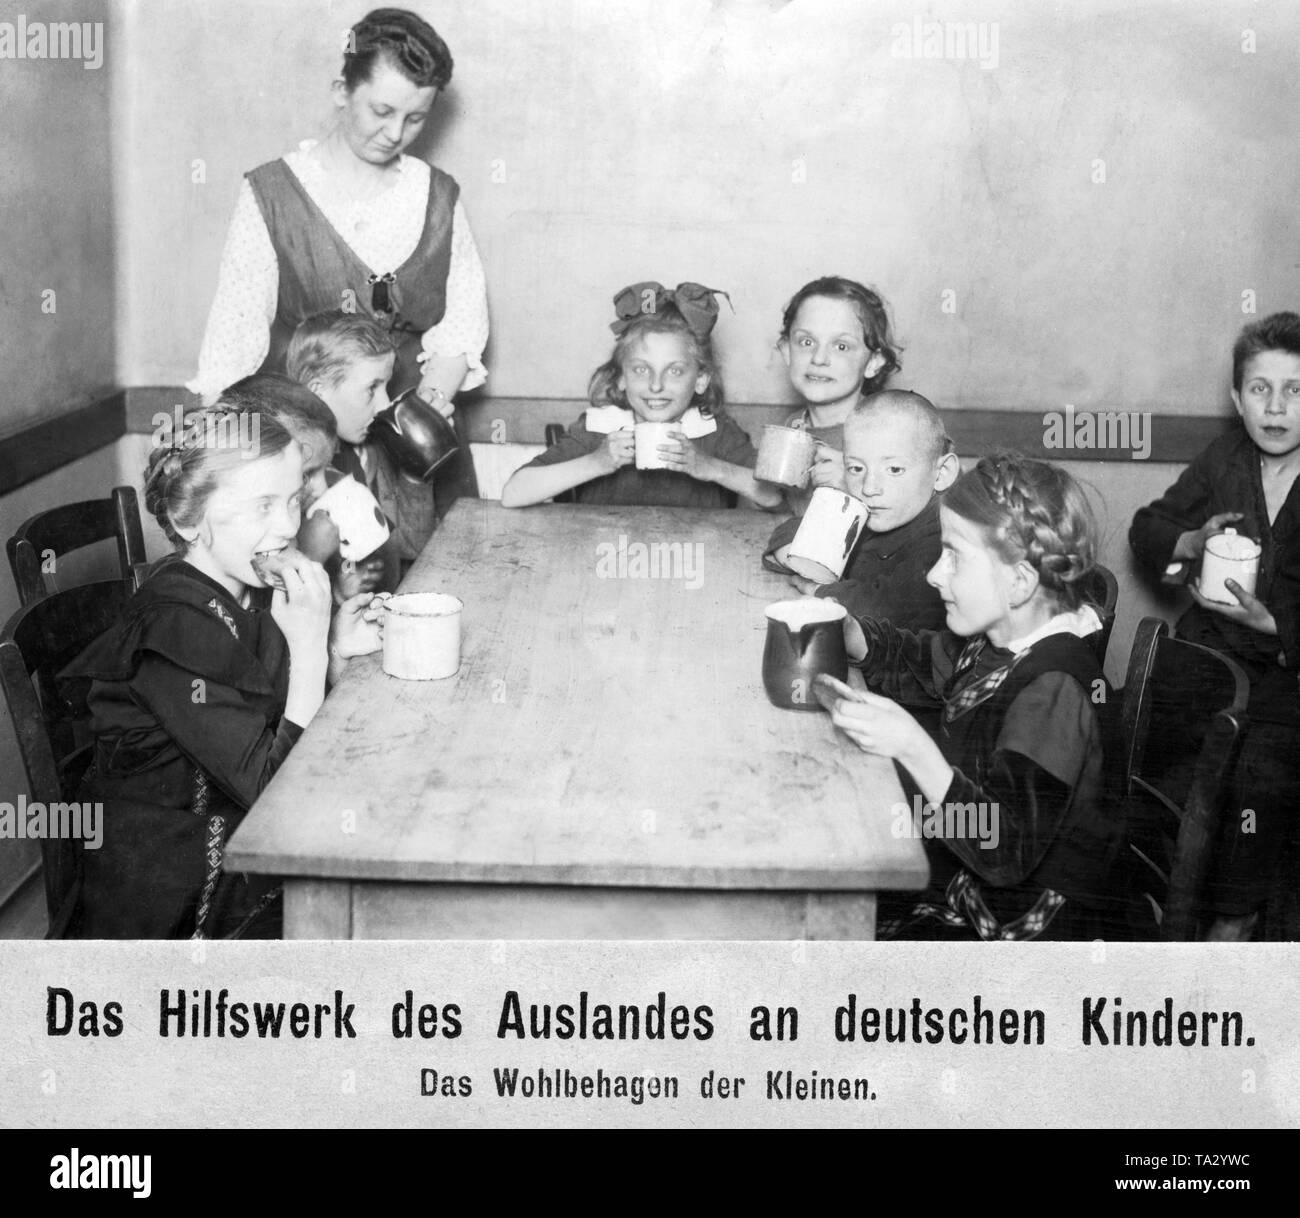 Eight children sit in a room - most around a table - each with a cup and  something to eat. On the left stands a woman who gives a boy a drink